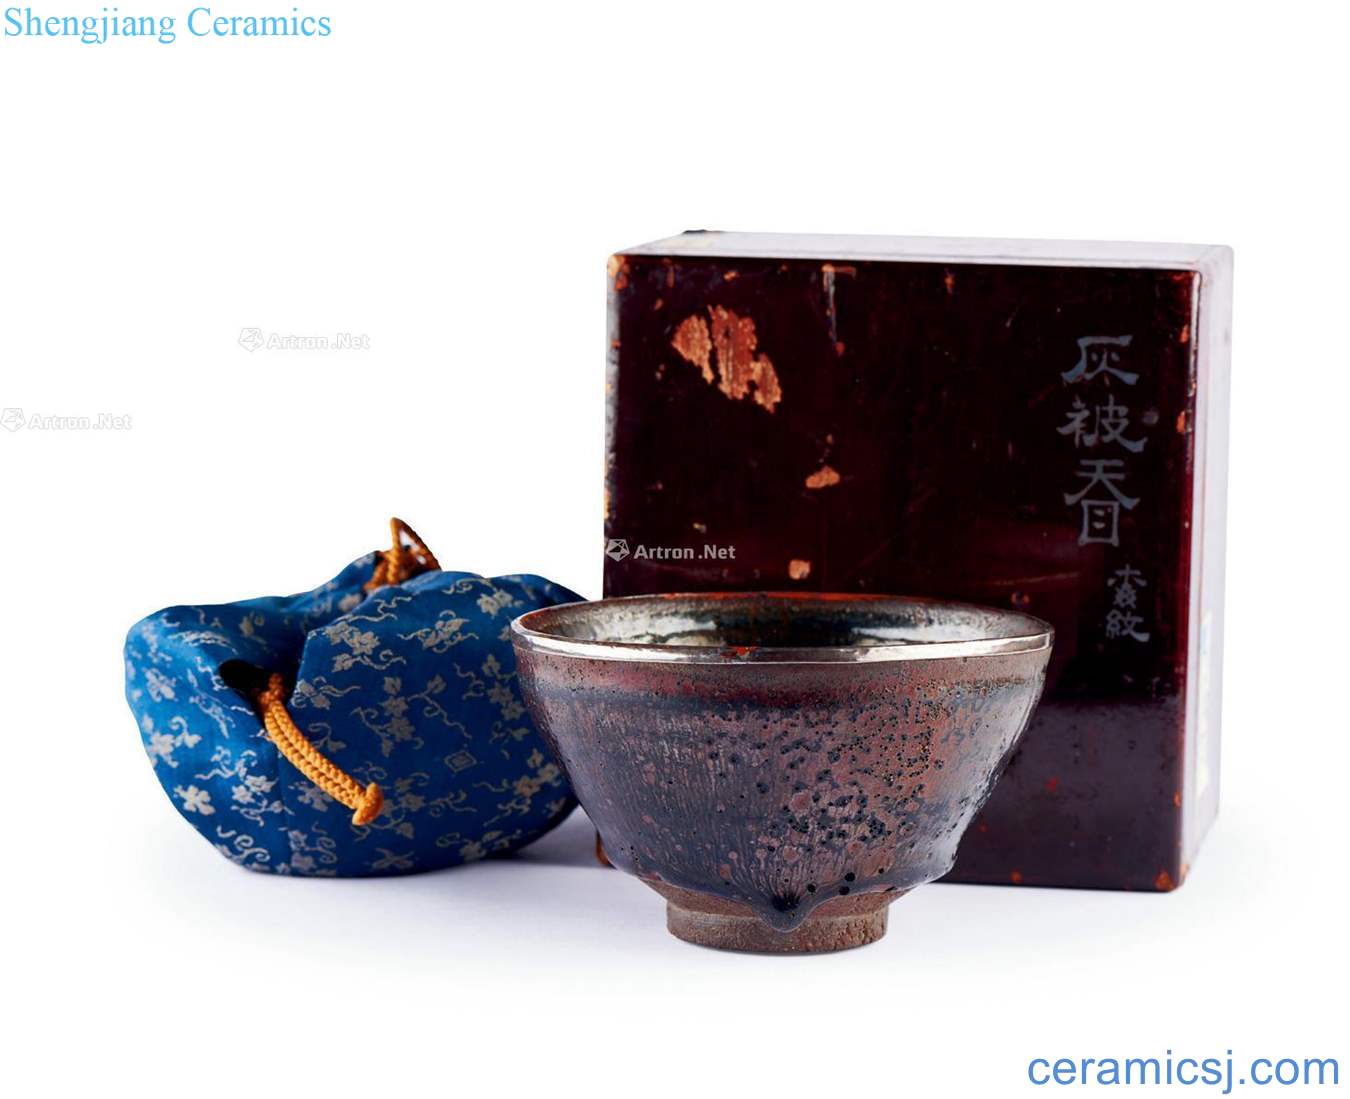 Song to build kilns fuels the "plum blossom" lines "TuHao" lamp that even the Japanese wooden box